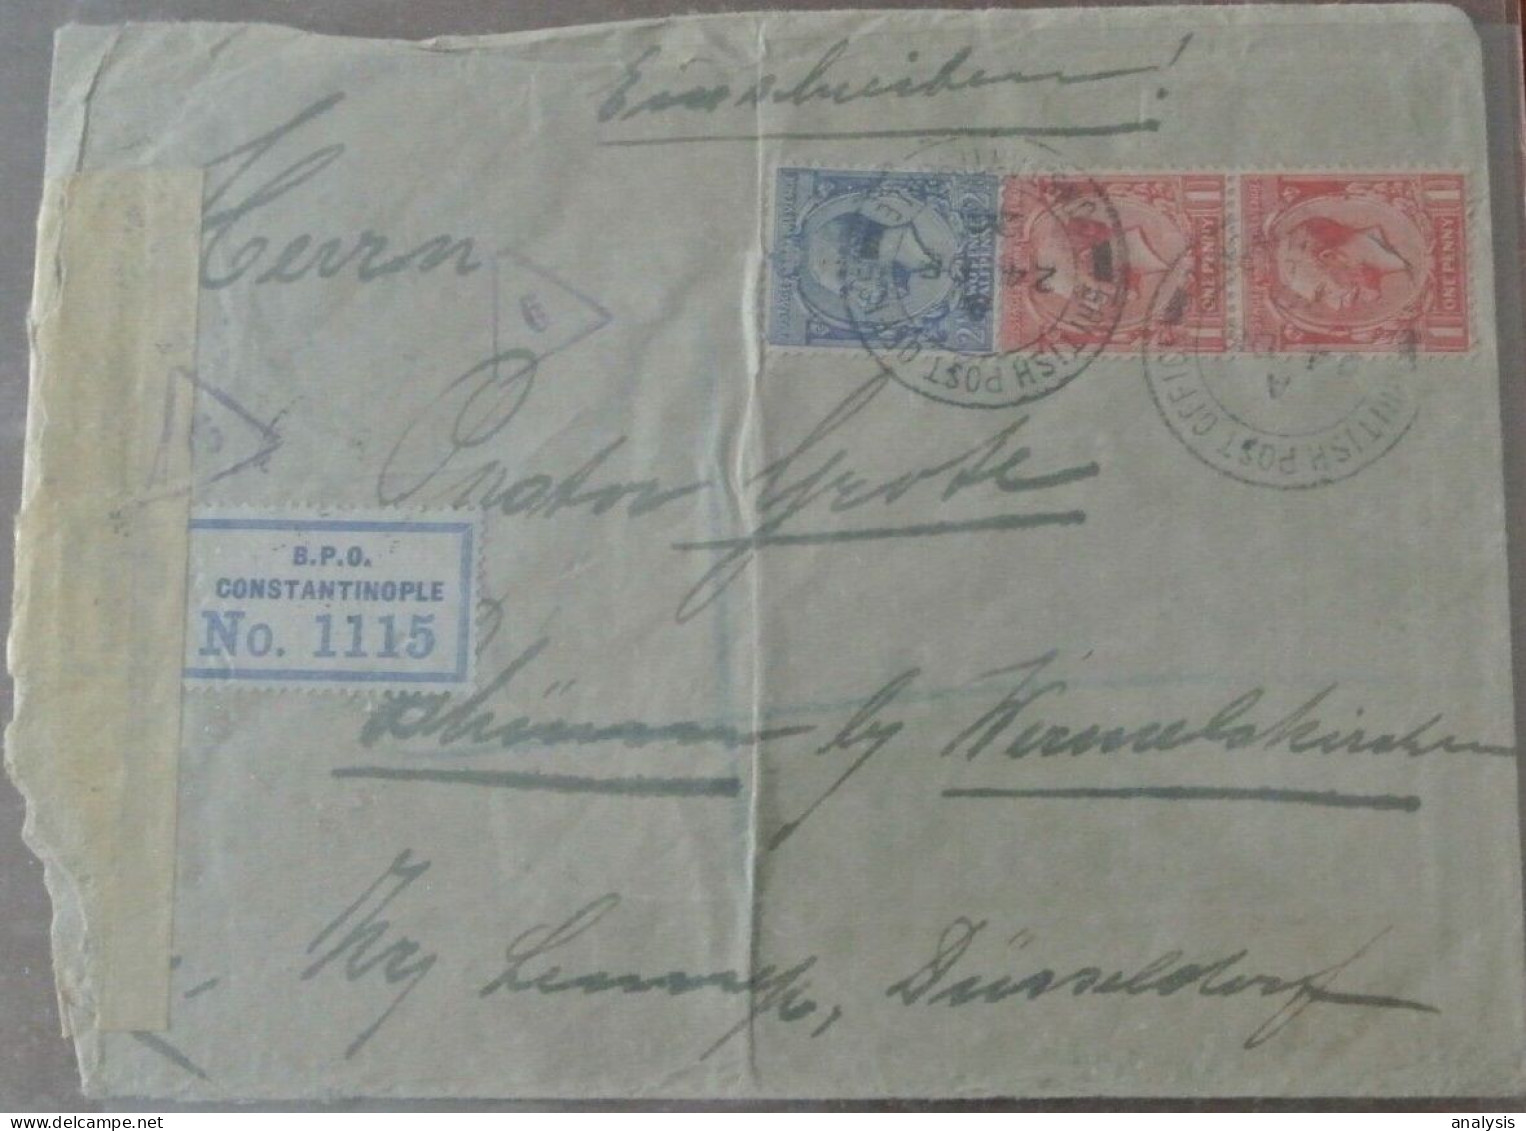 British Levant Turkey Constantinople Registered Cover Mailed To Germany 1920 Censor. British Post - British Levant